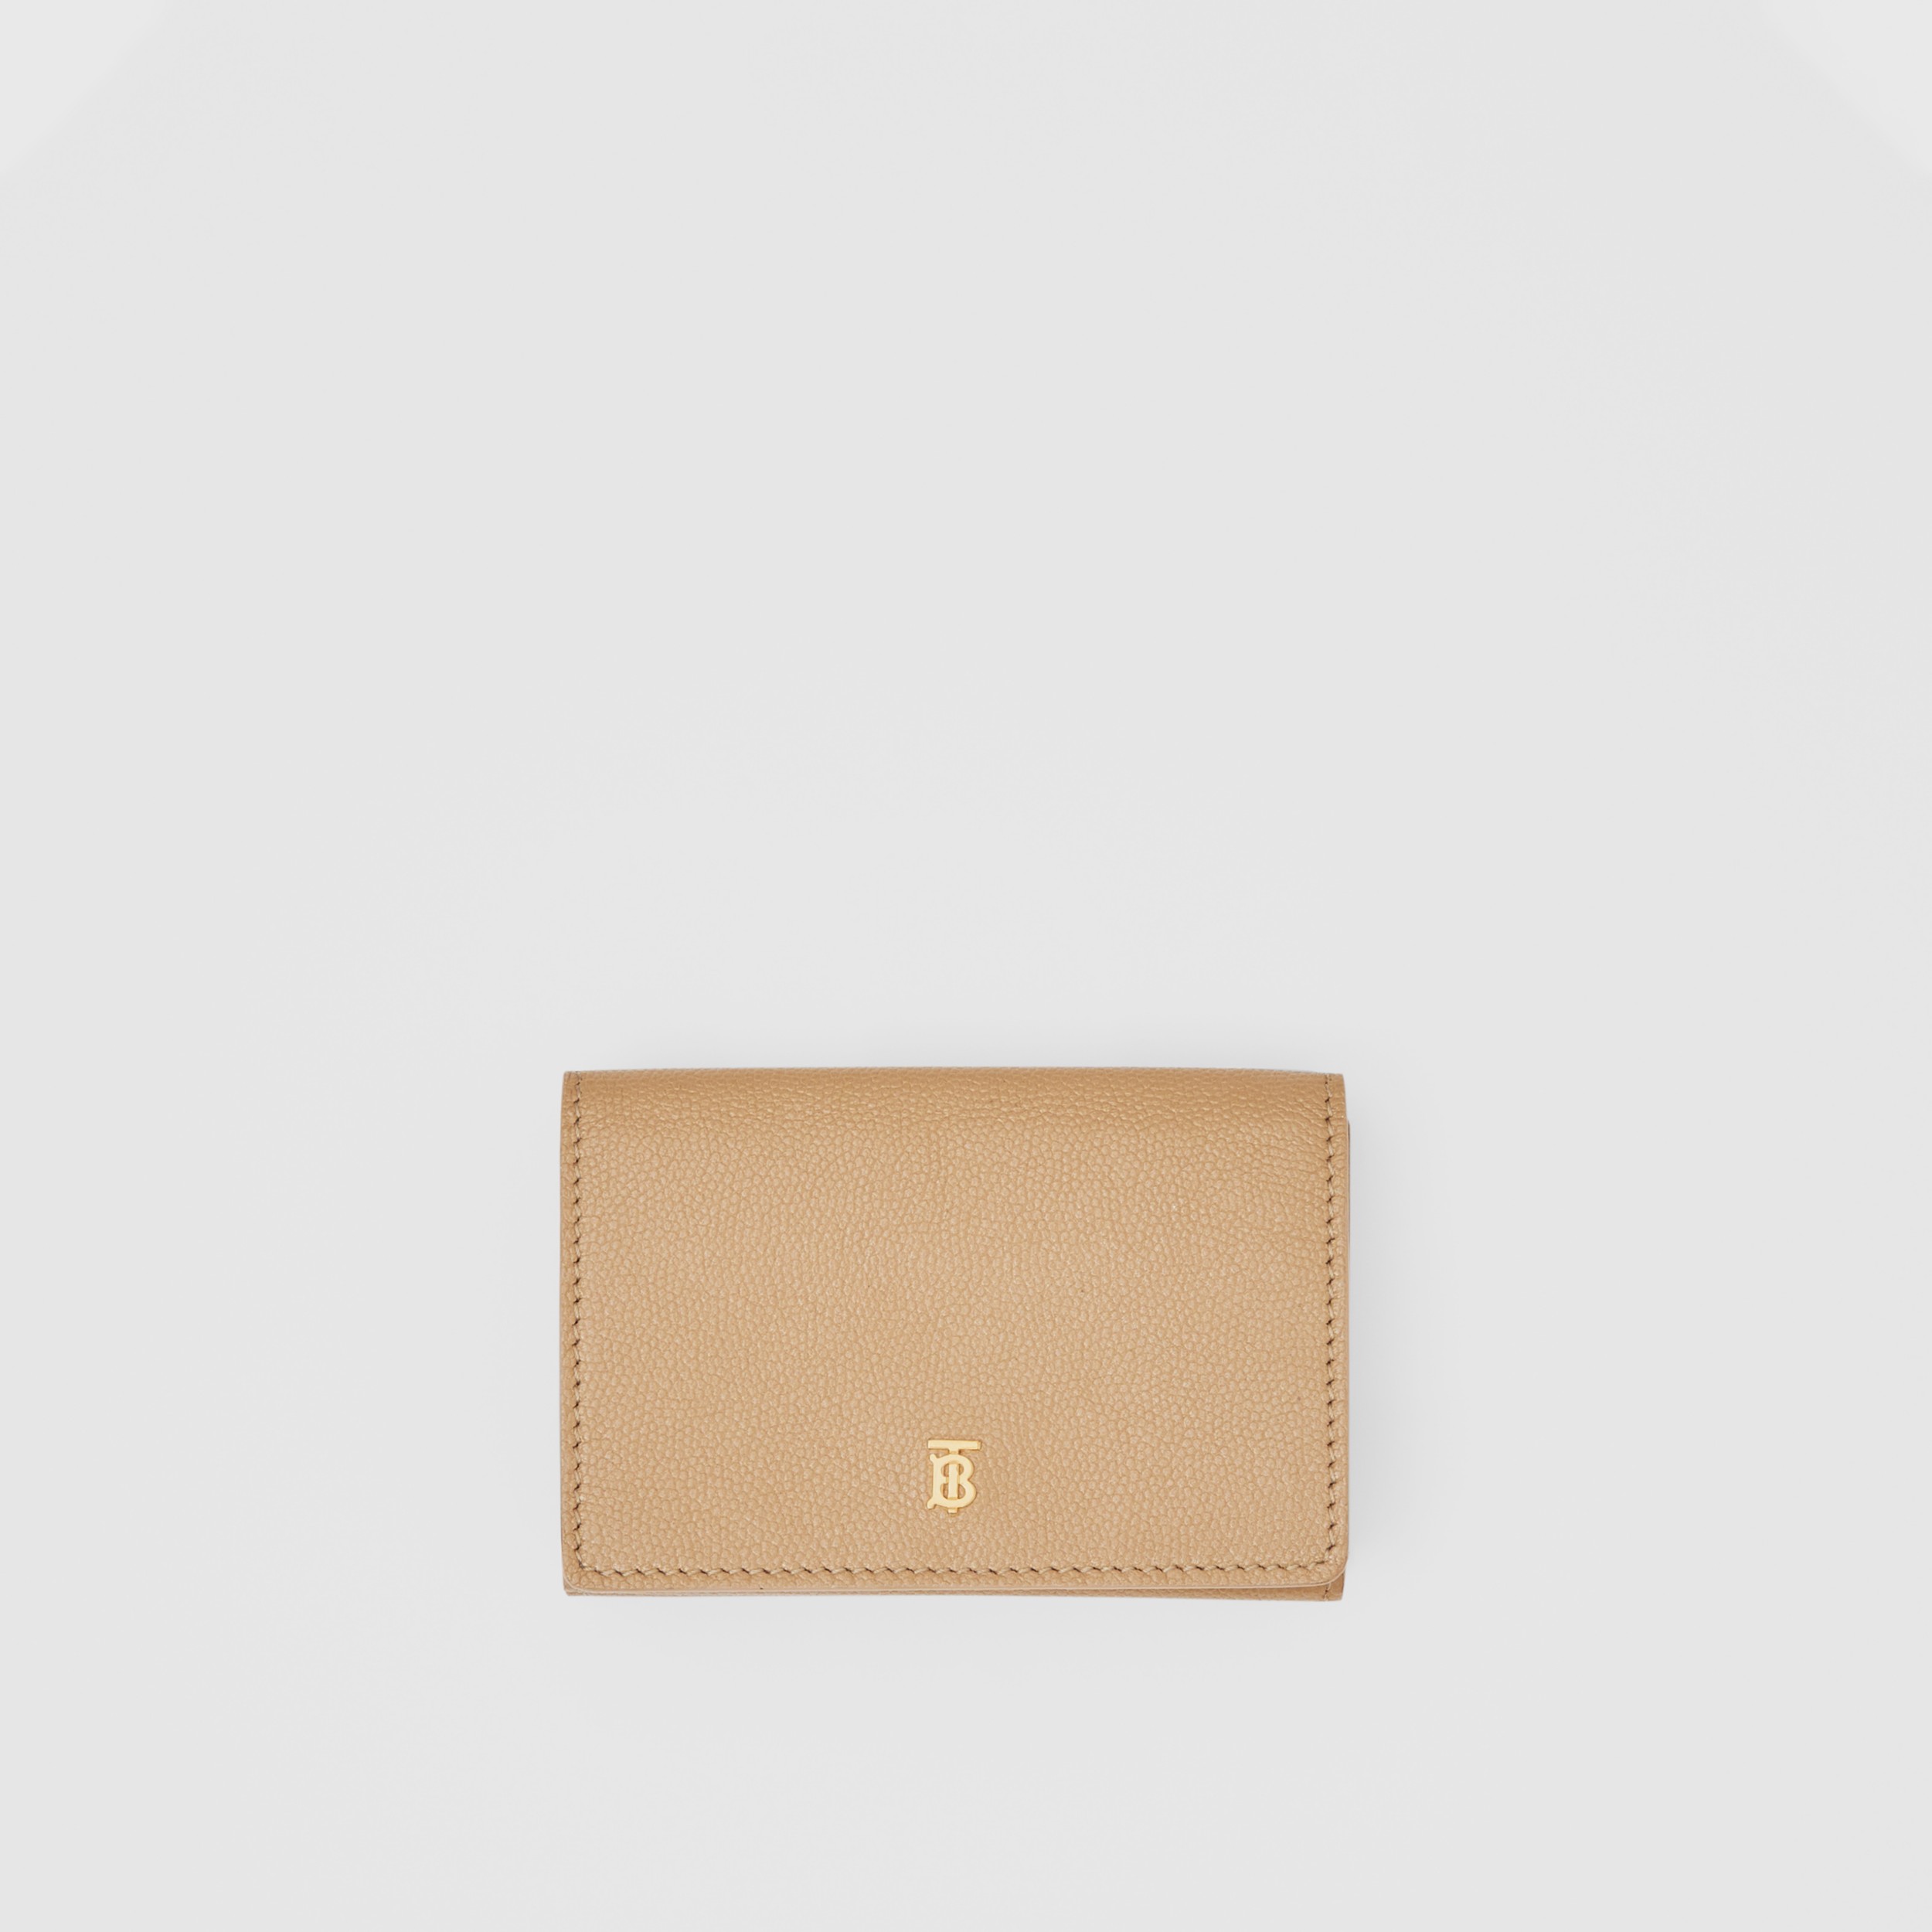 Small Grainy Leather Folding Wallet in Archive Beige - Women | Burberry